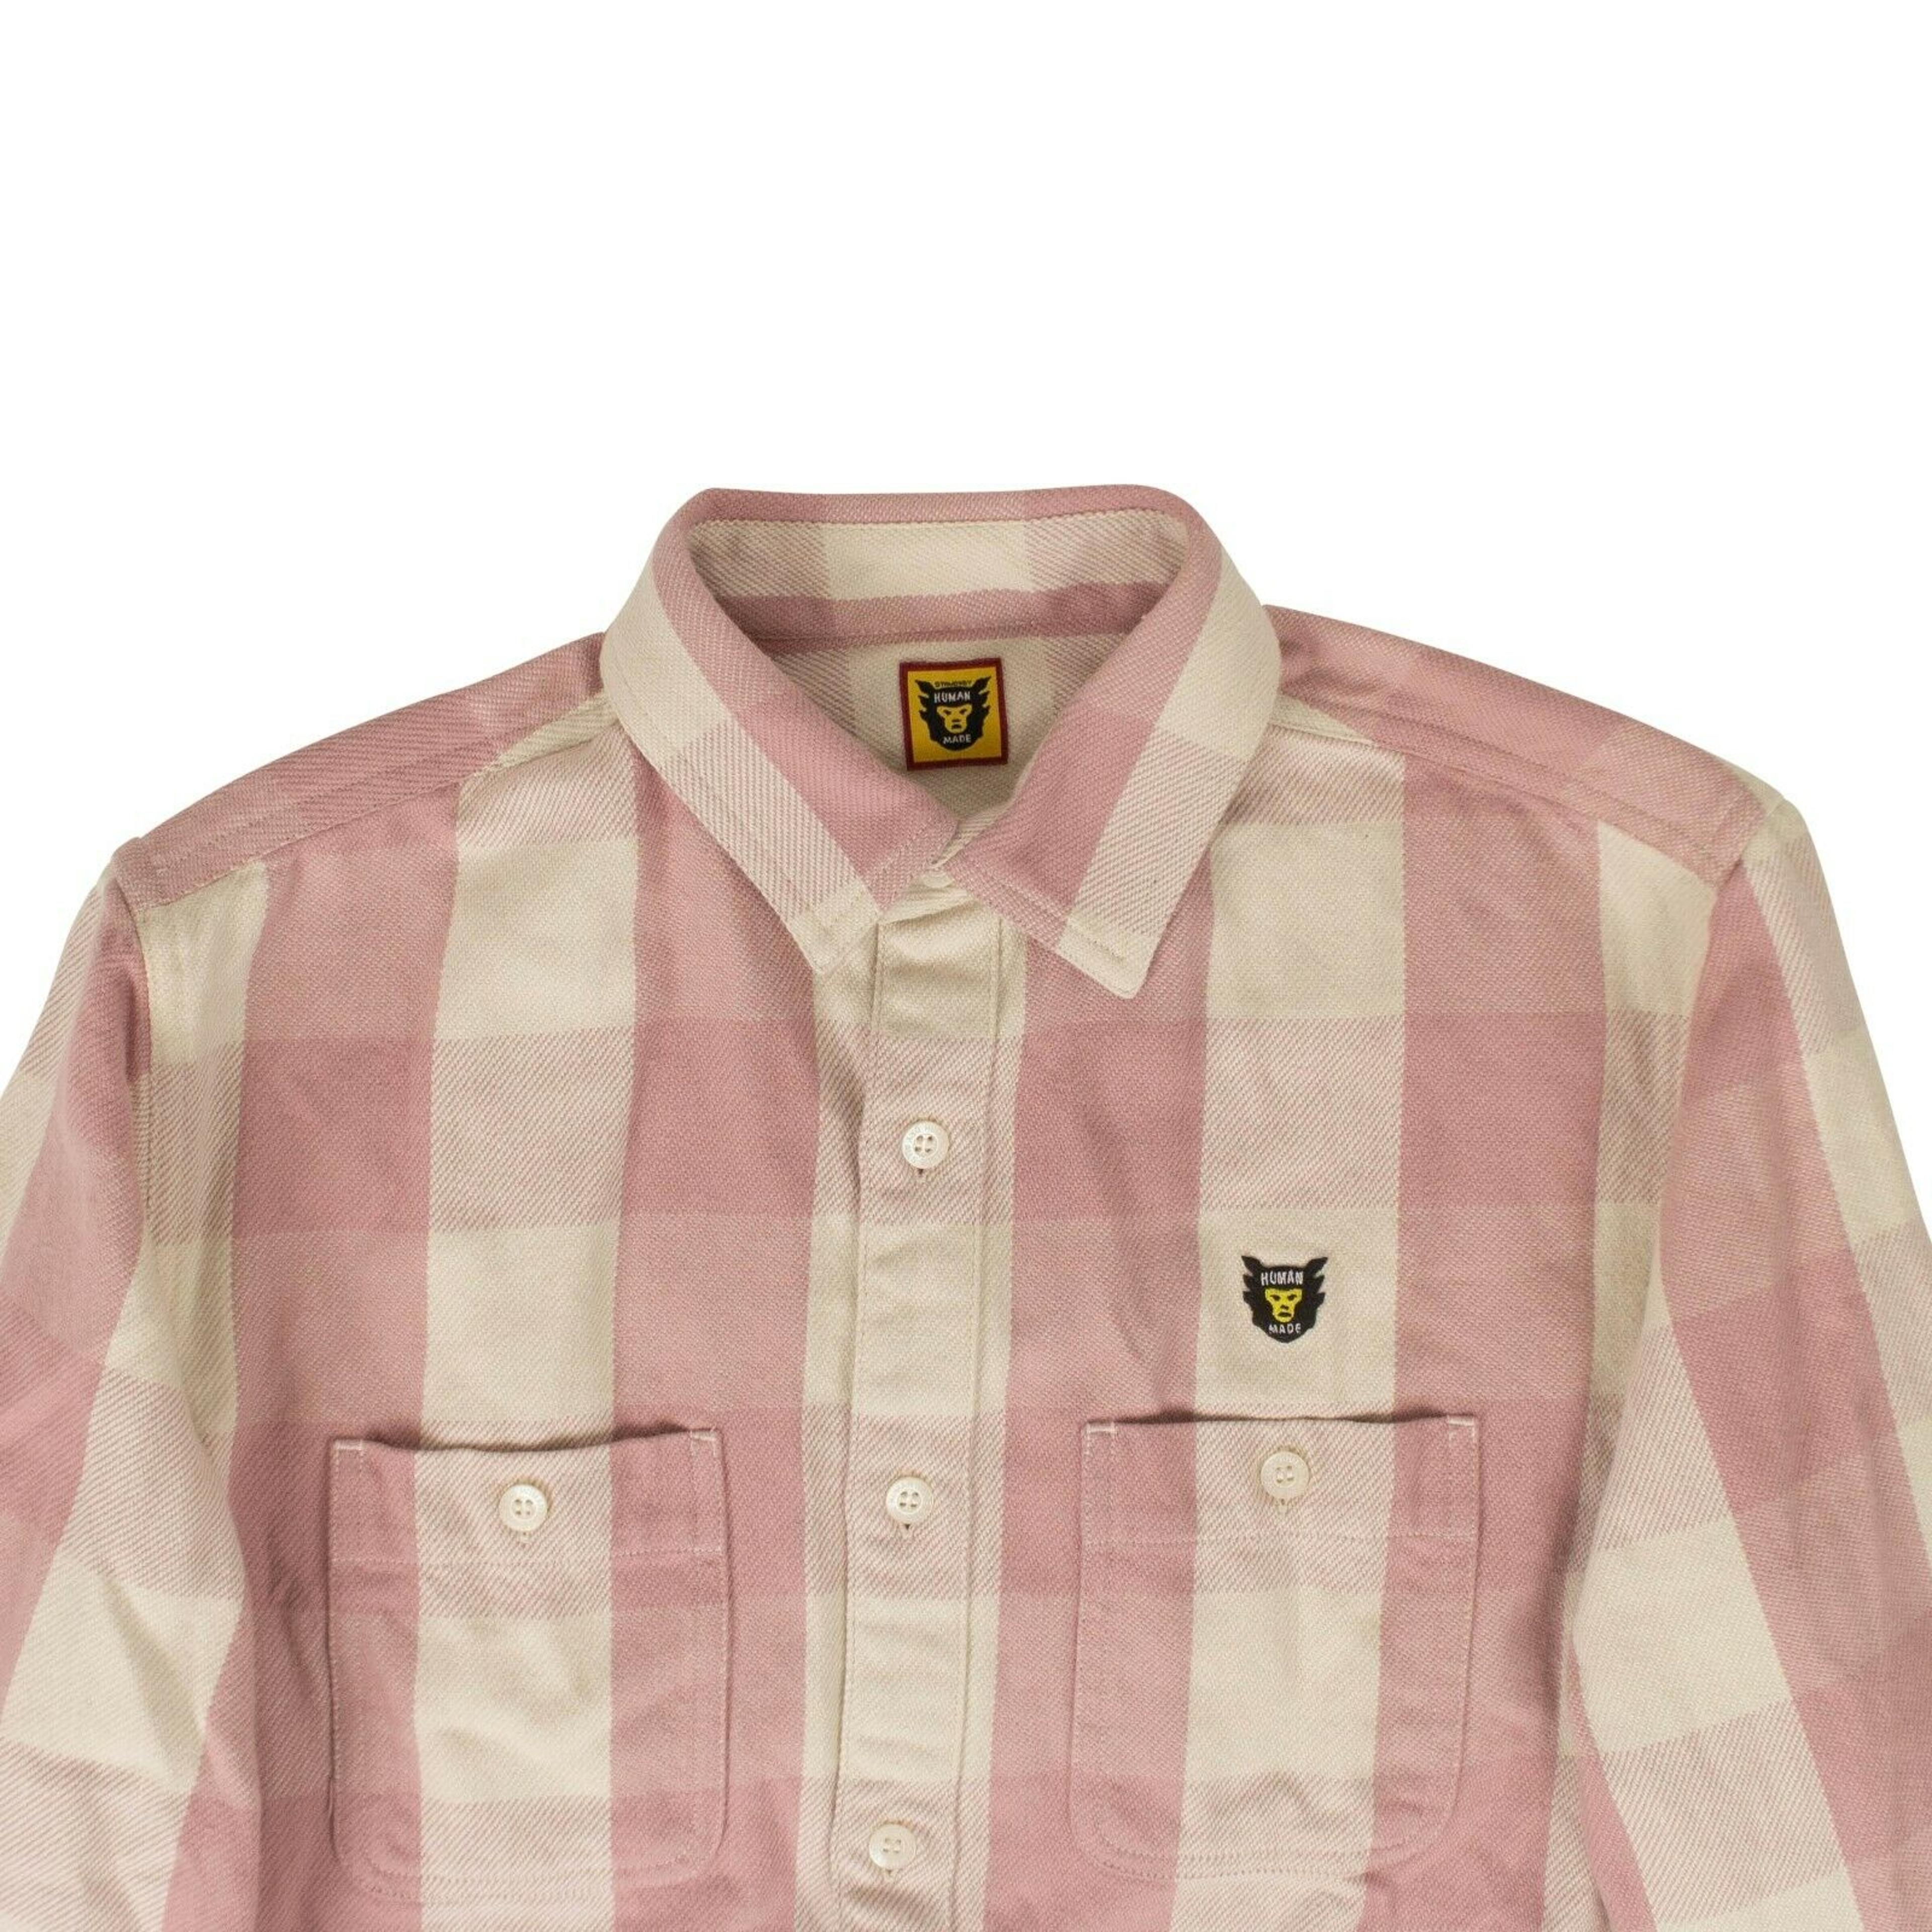 Alternate View 2 of Pink And White Check Button Down Shirt